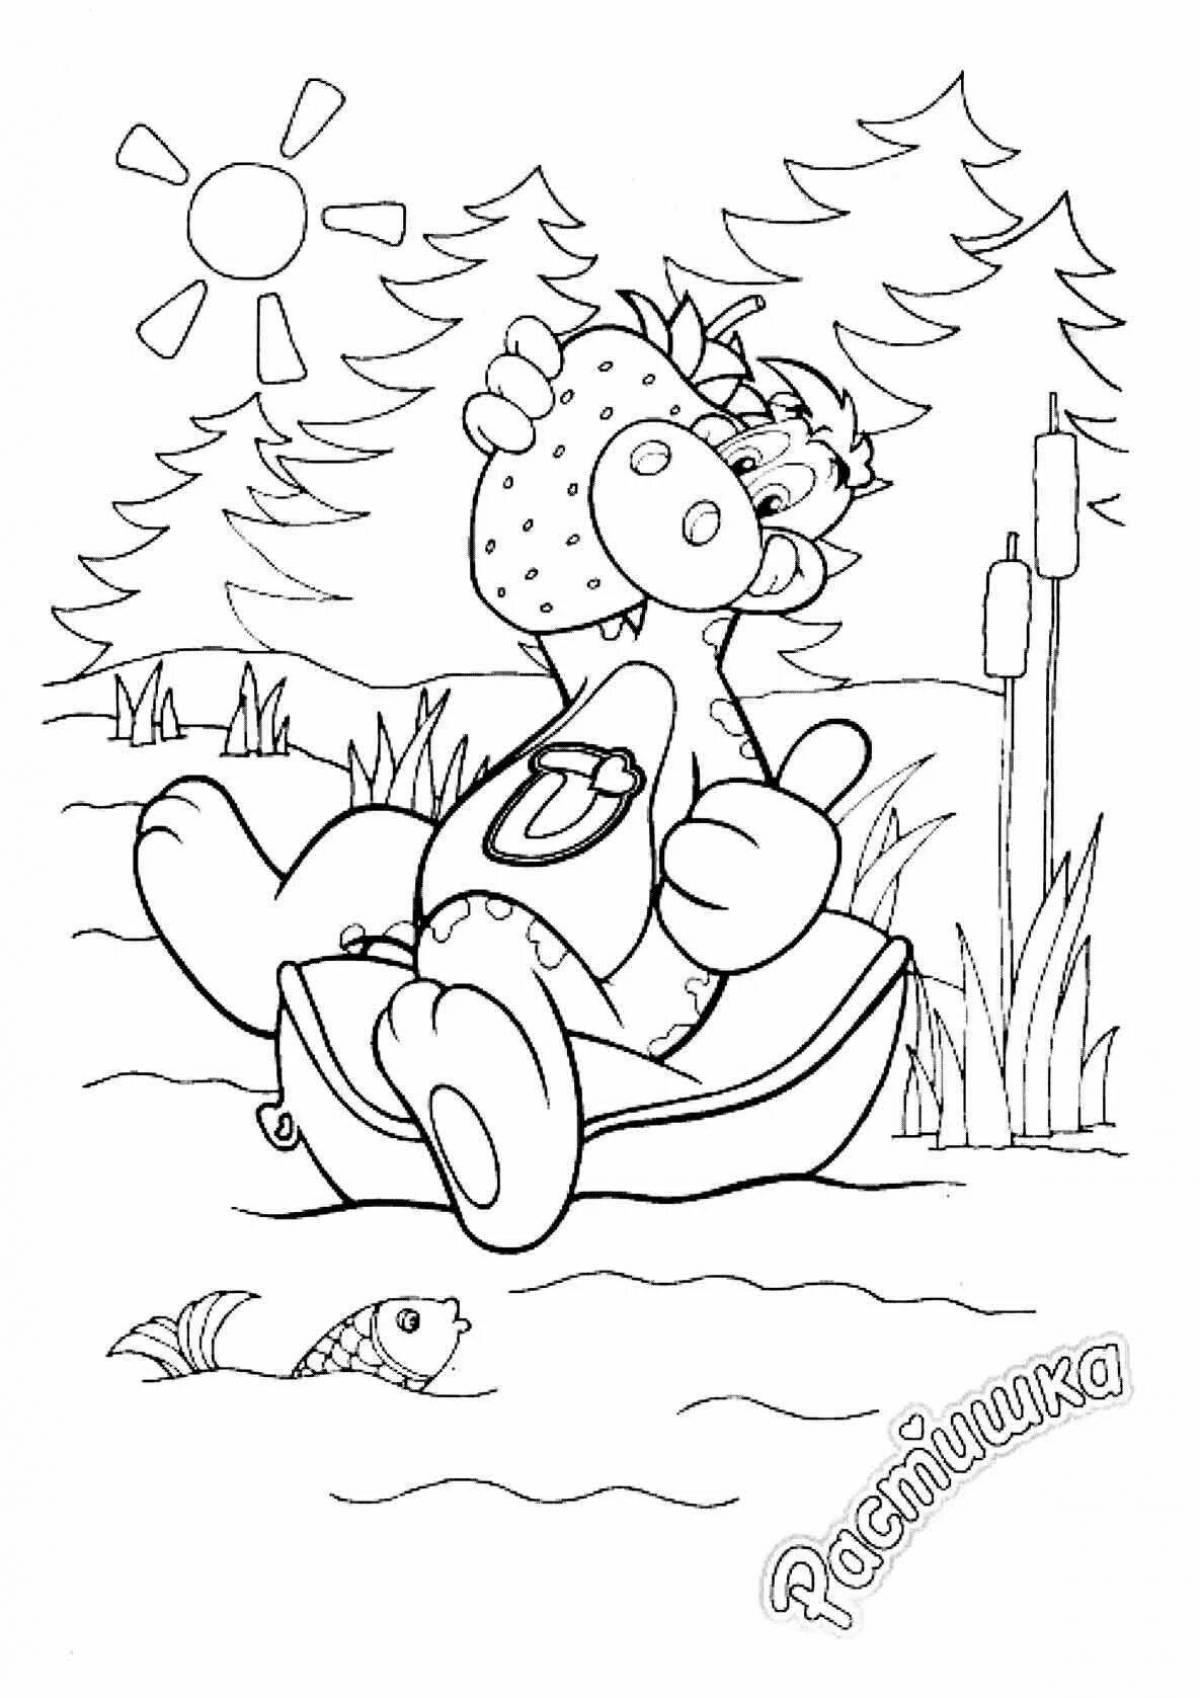 Fancy dino plant coloring page